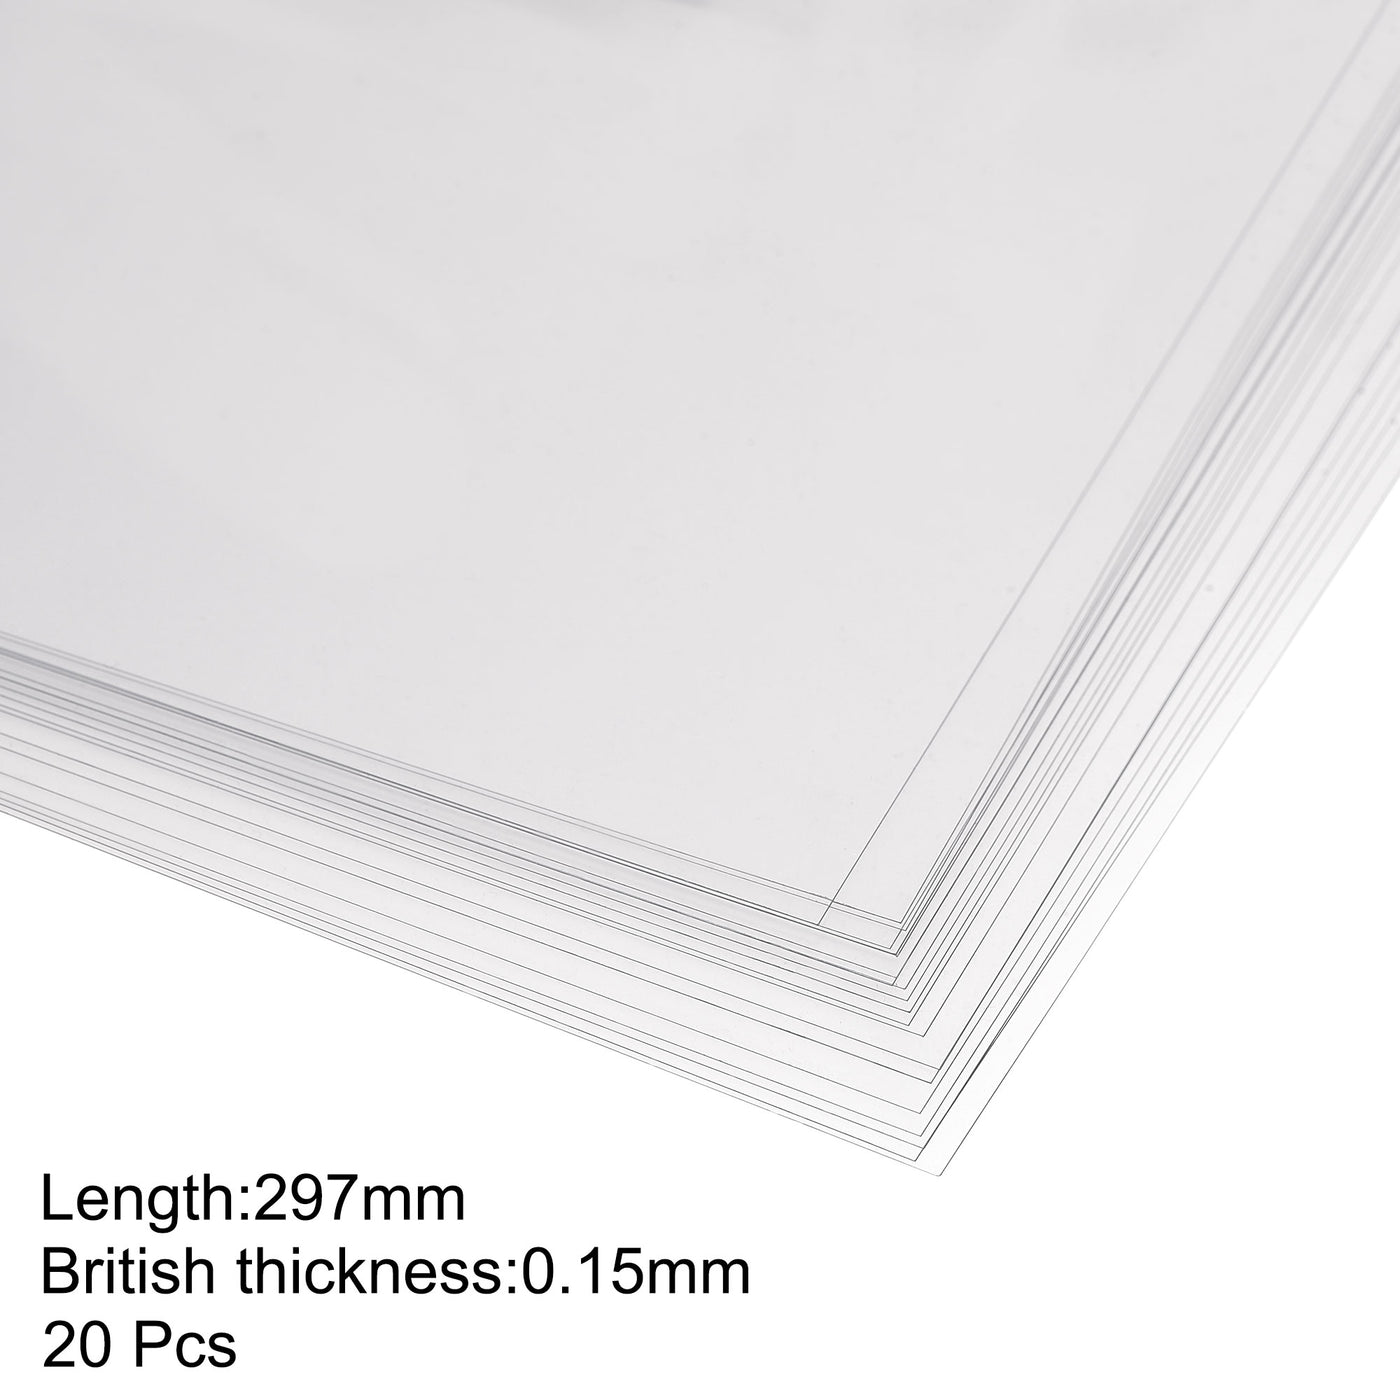 uxcell Uxcell 0.15mm Thick A4 Size Clear PVC Sheet 297mm x 210mm Flexible Cover Protector,Office,DIY Cutting,20pcs